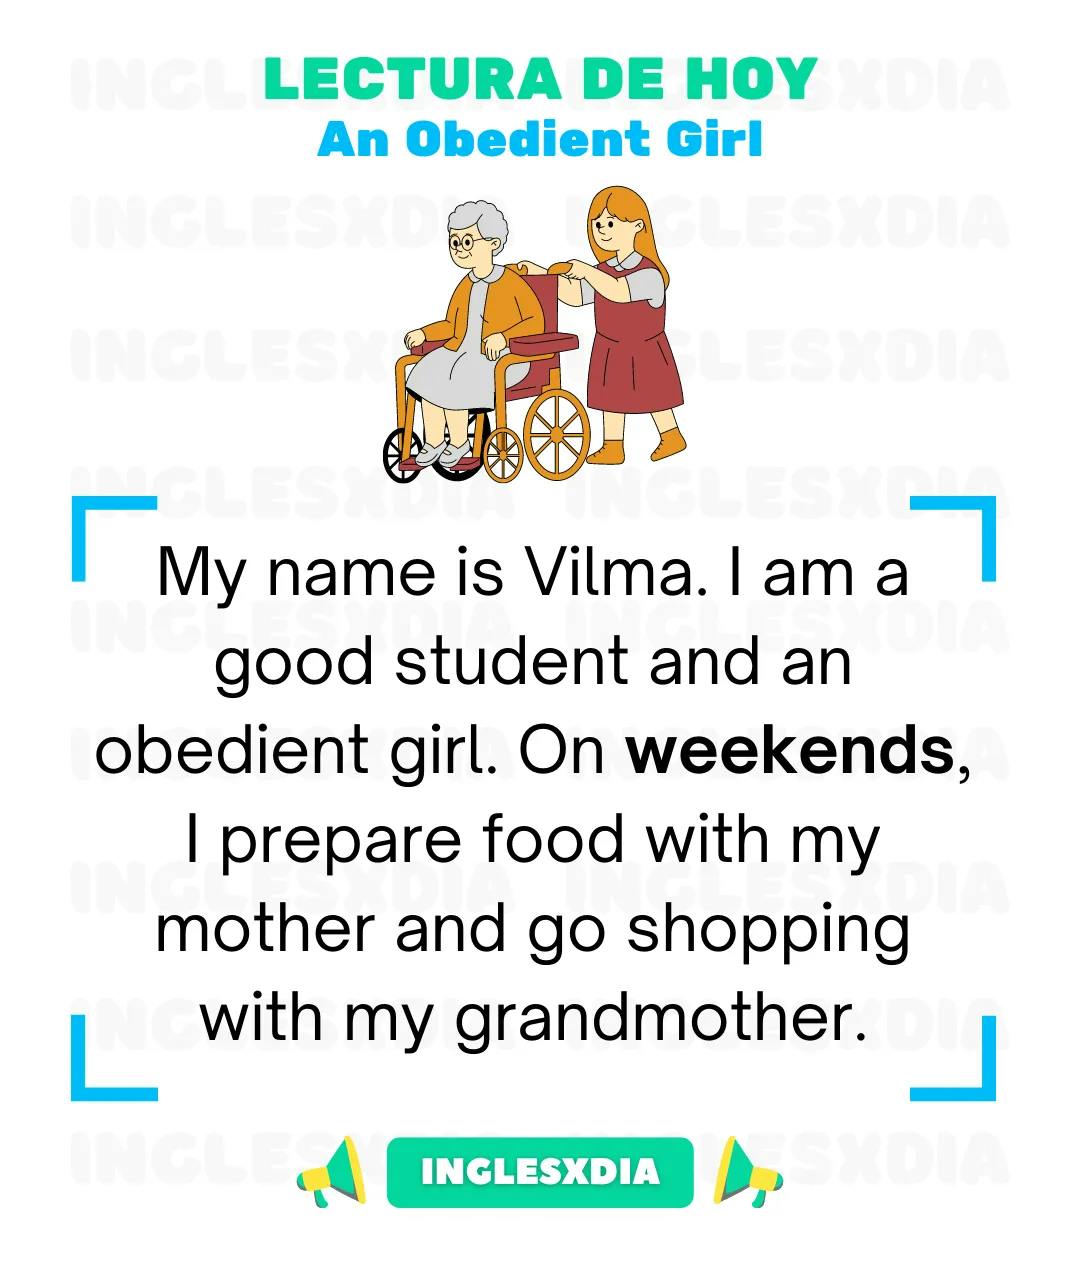 An Obedient Girl